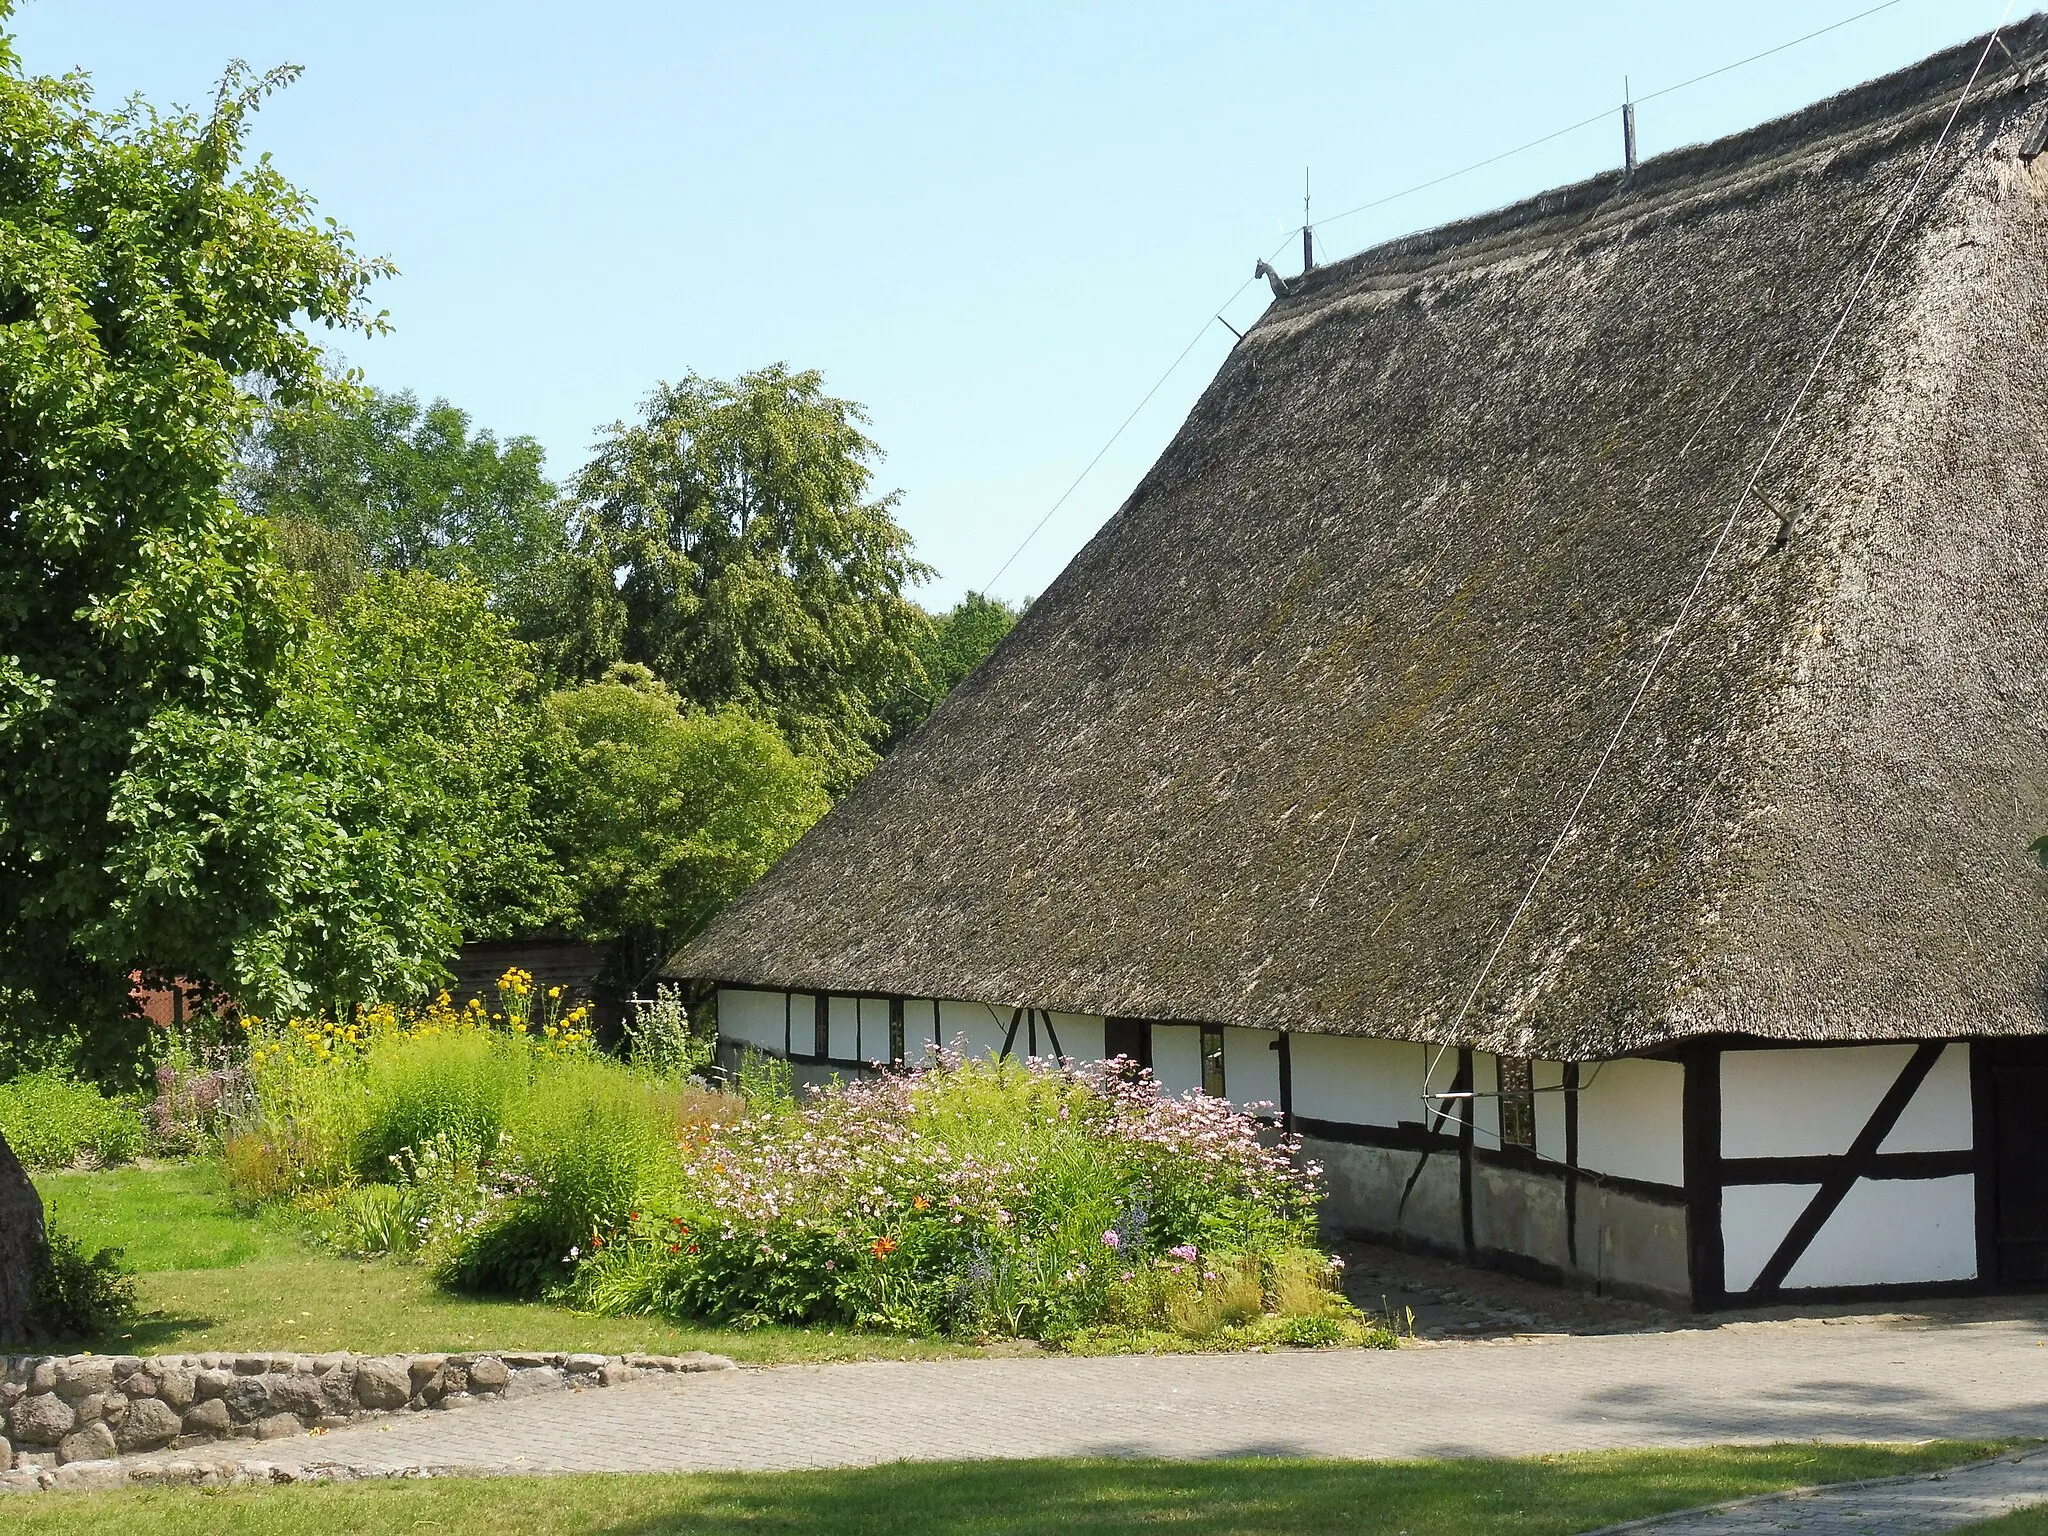 Photo showing: This Low German house is listed. It is located Dorfstrasse 8 in Schwerin in Mecklenburg-Vorpommern and home to family-owned village museum Dat oll' Hus (Low German for The old house). Side view shows the vast roof that sweeps down to just above head height. Next to the side is a typical bed of a cottage garden.